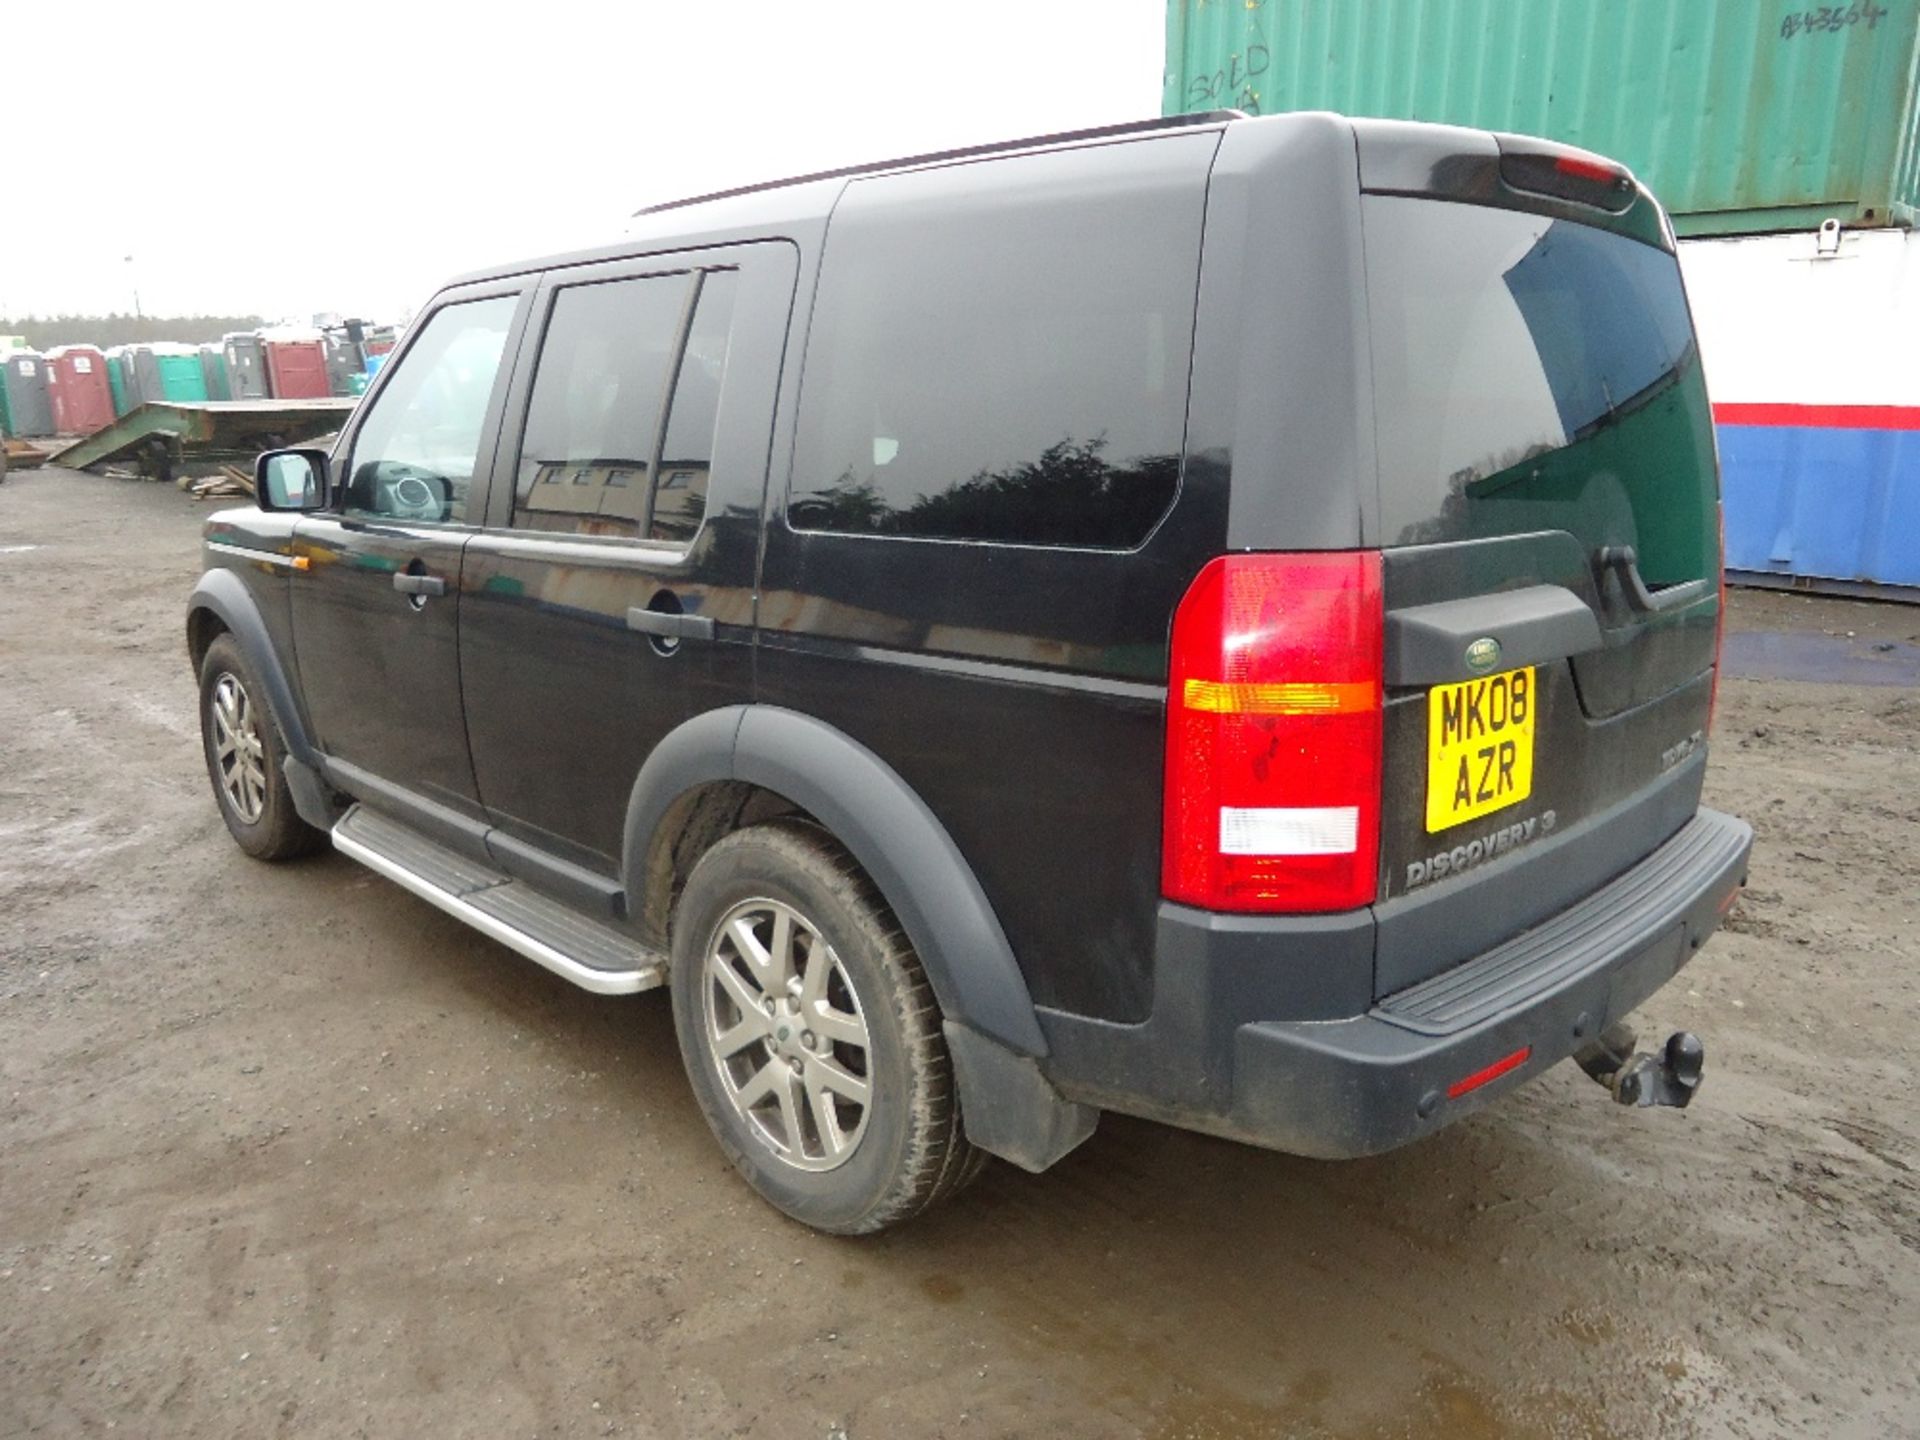 2008 Land Rover Discovery 3 Commercial XS 2.7 V6 diesel auto 4x4 utility vehicle
Date of - Image 4 of 10